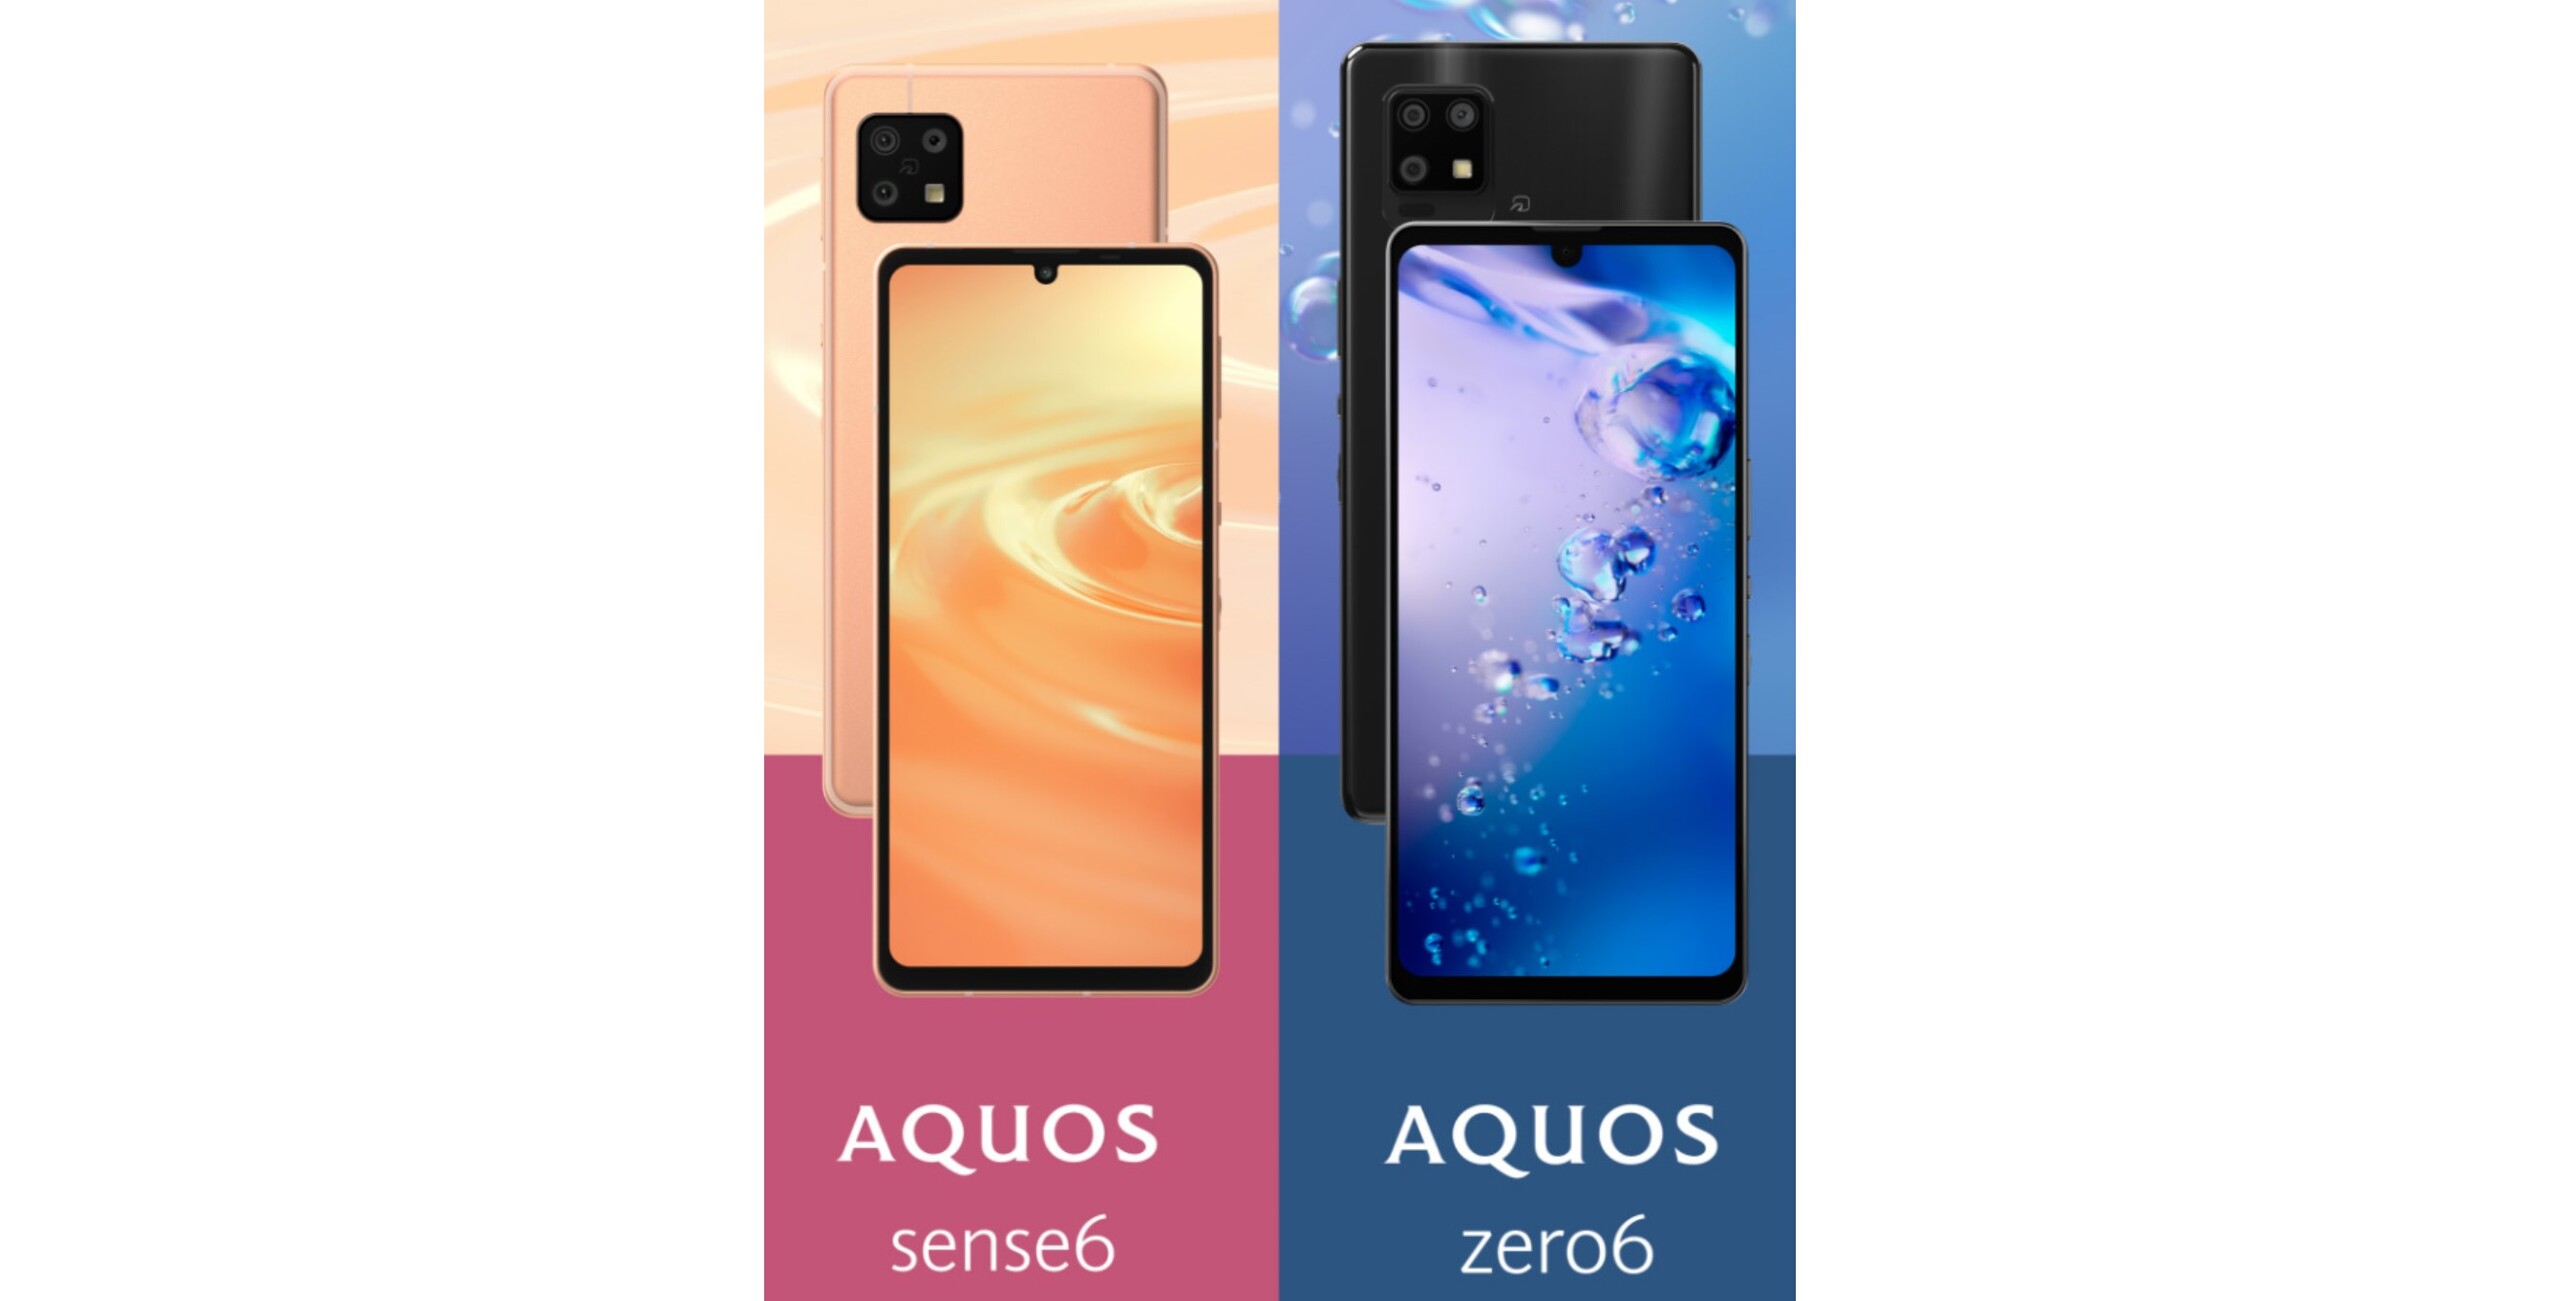 The new 240Hzdisplay Aquos zero6 launches as Sharp's lightest 5G phone